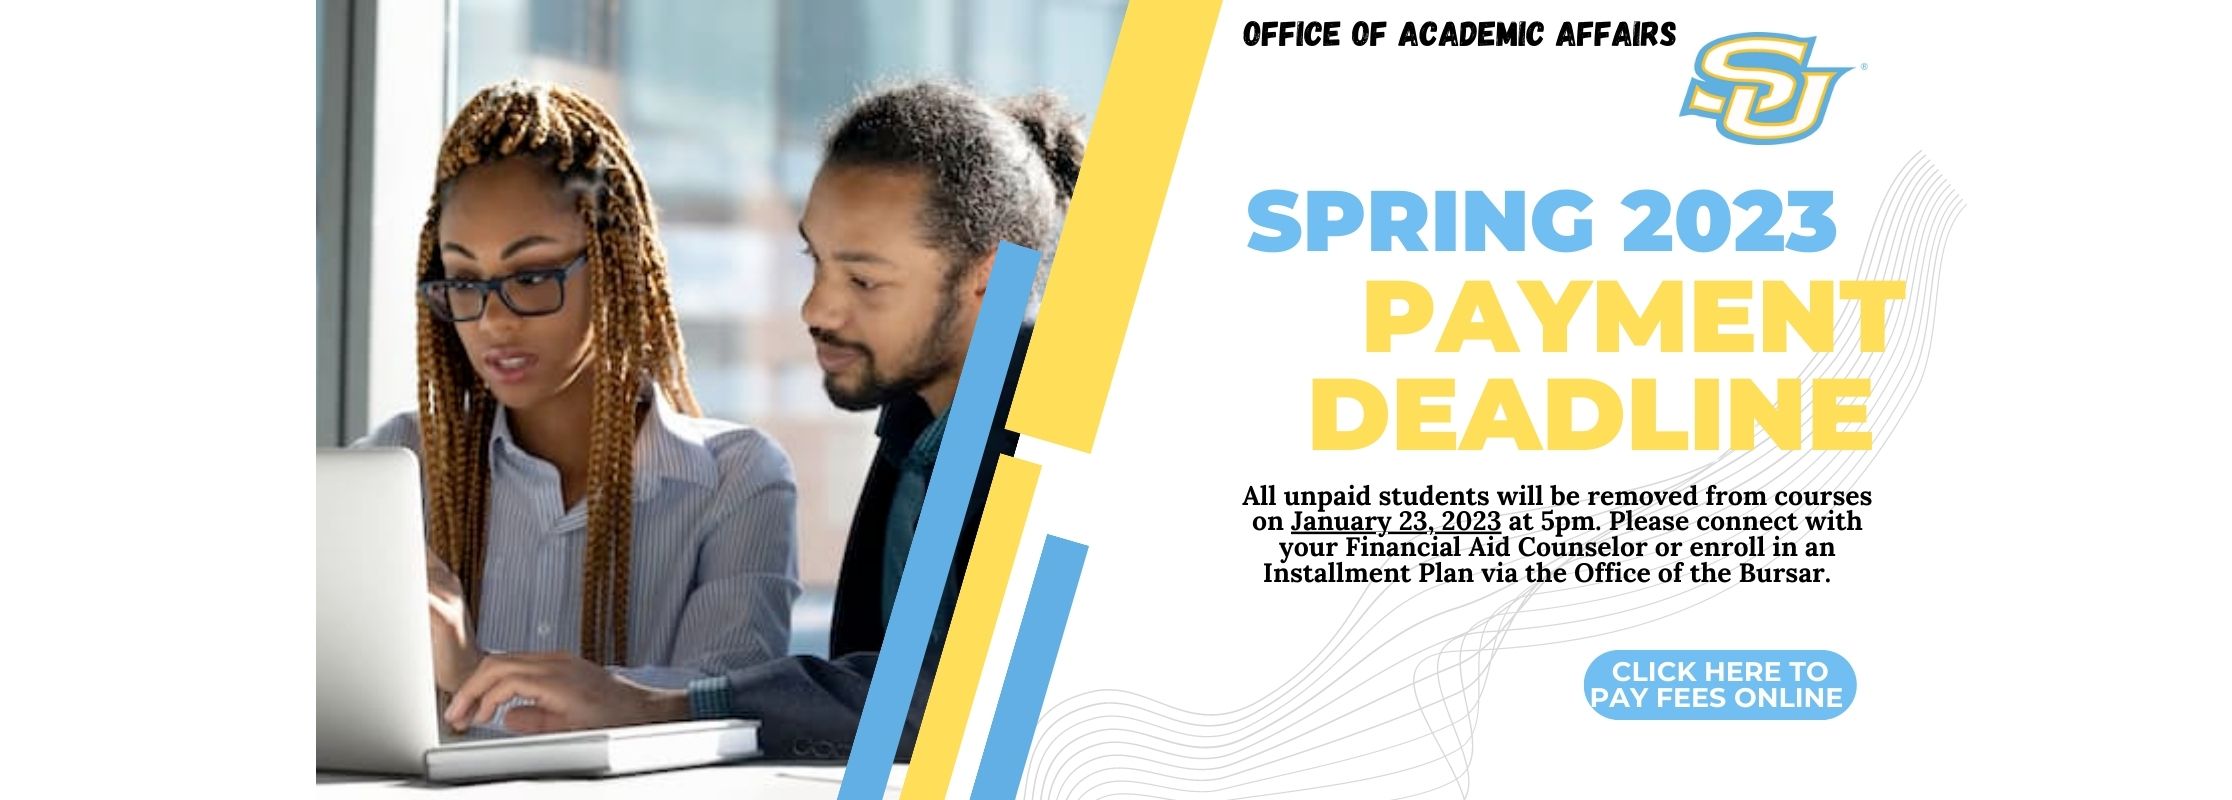 Spring 2023 Deadline to Pay Student Fees